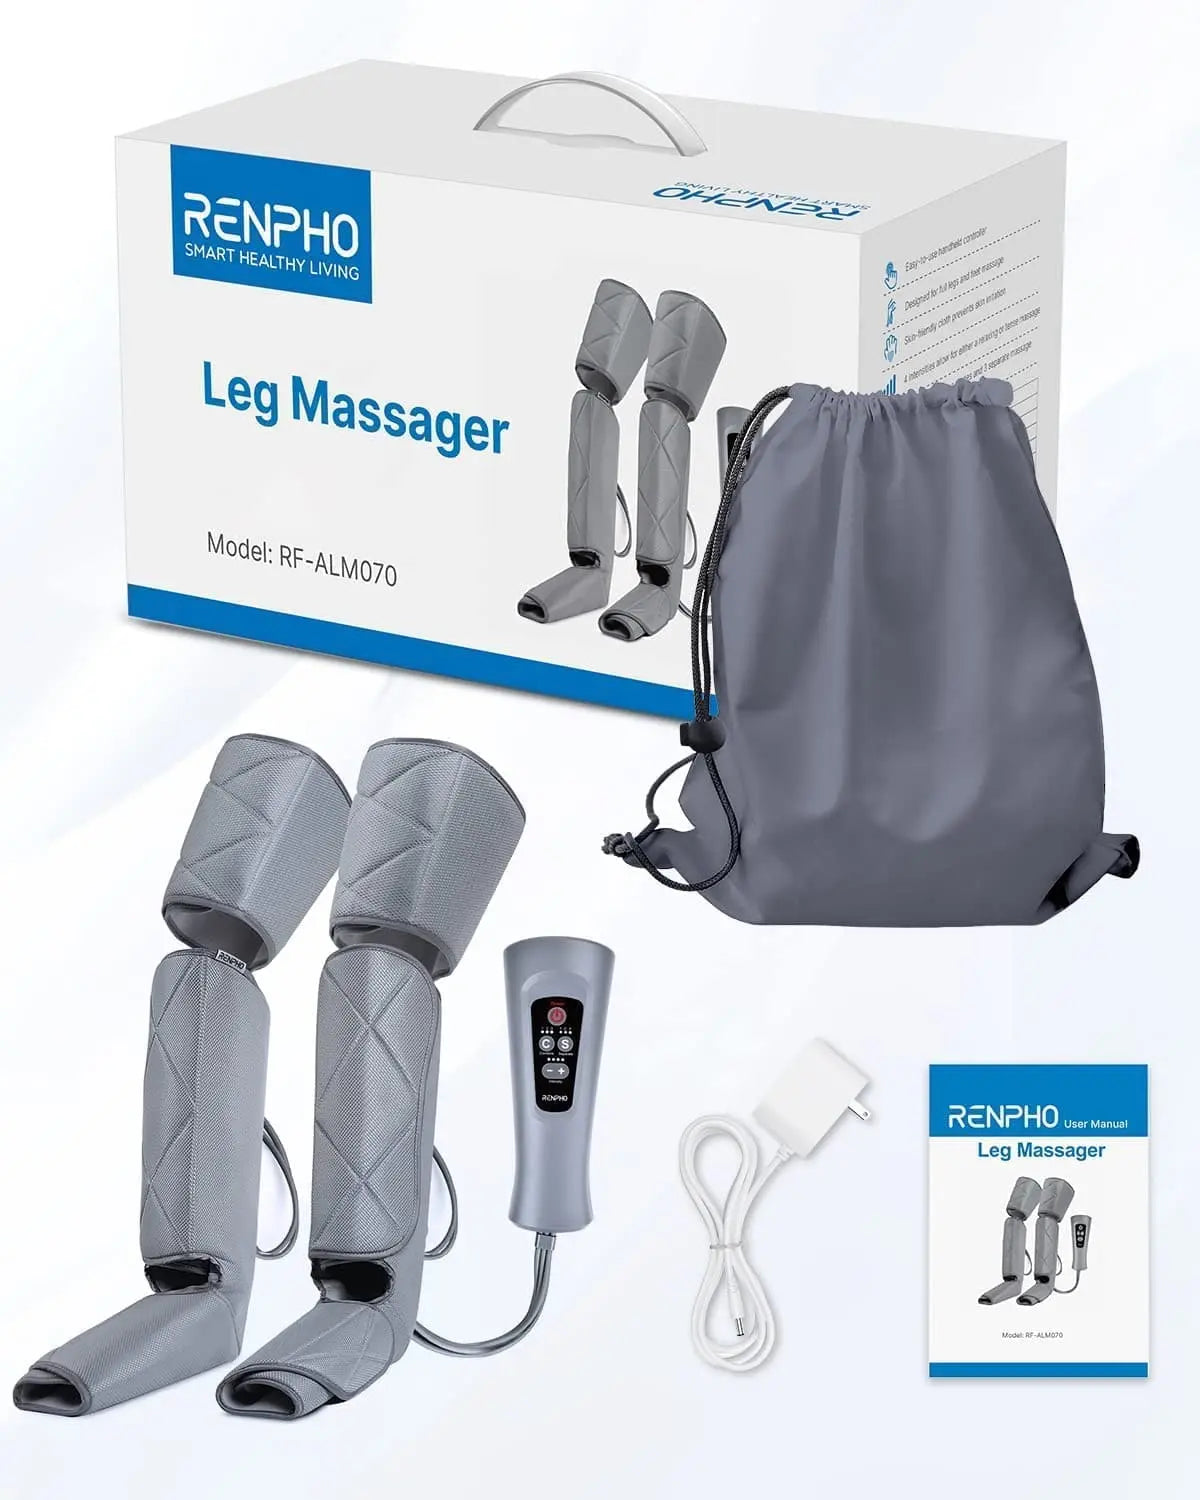 An image shows the Renpho EU Aeria Ultimate Thermal Full Leg Massager with air compression and heat comfort. The set includes two grey leg cuffs, a remote control, a power adapter, a carrying bag, and a user manual. The packaging features product images and branding with the slogan "Smart Healthy Living." Model number RF-ALM070 is visible.